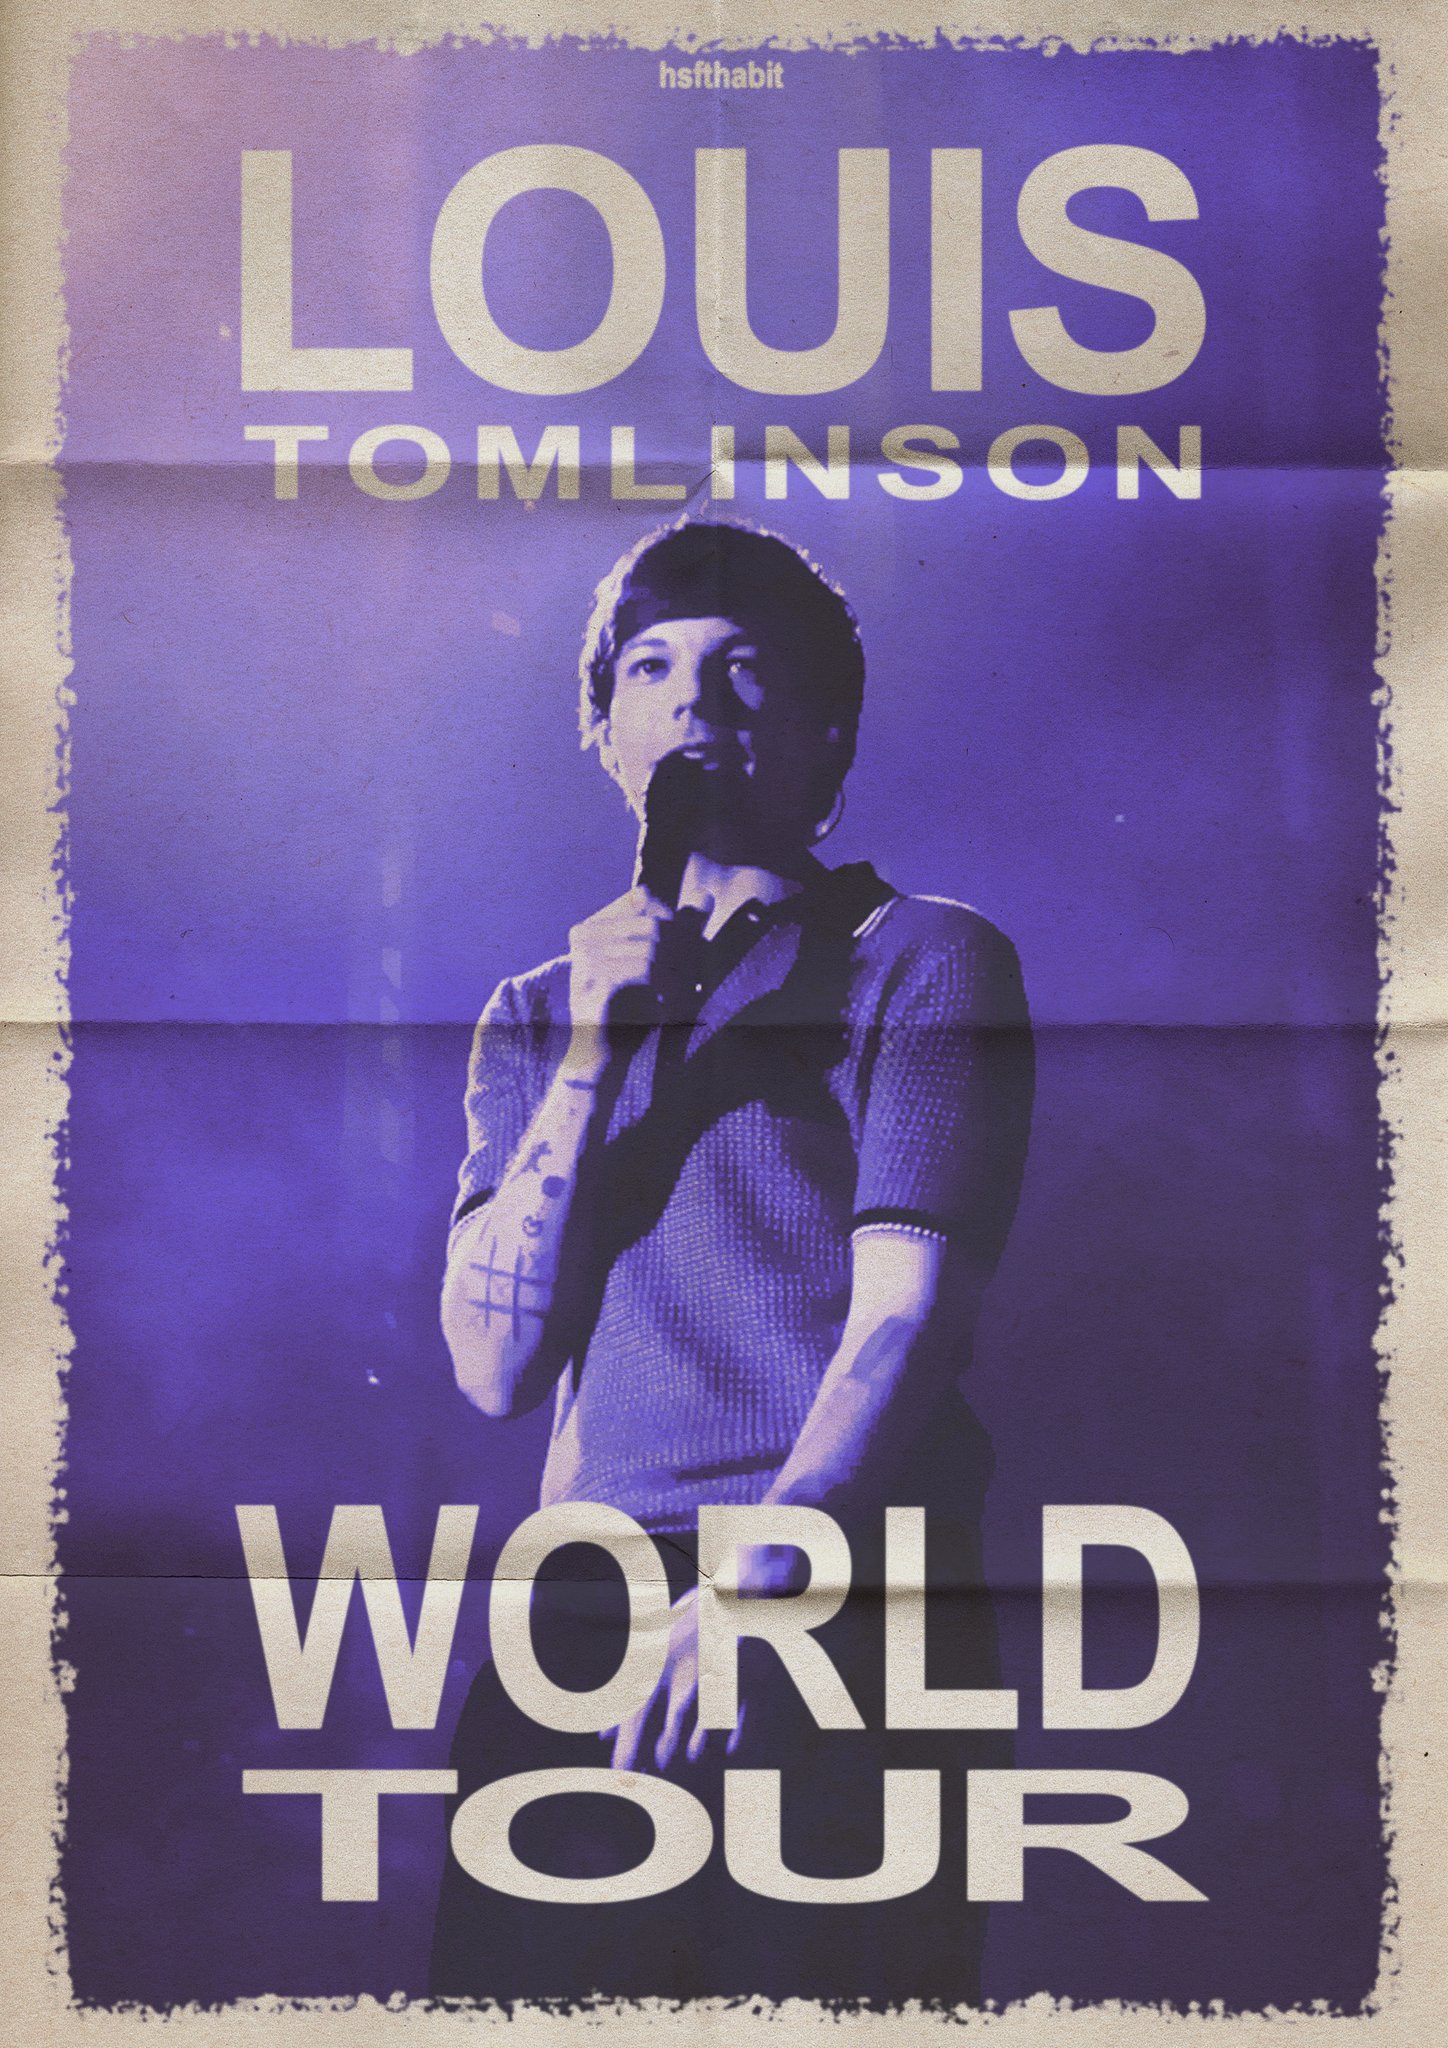 WALLS by Louis Tomlinson (FLYER) on Behance